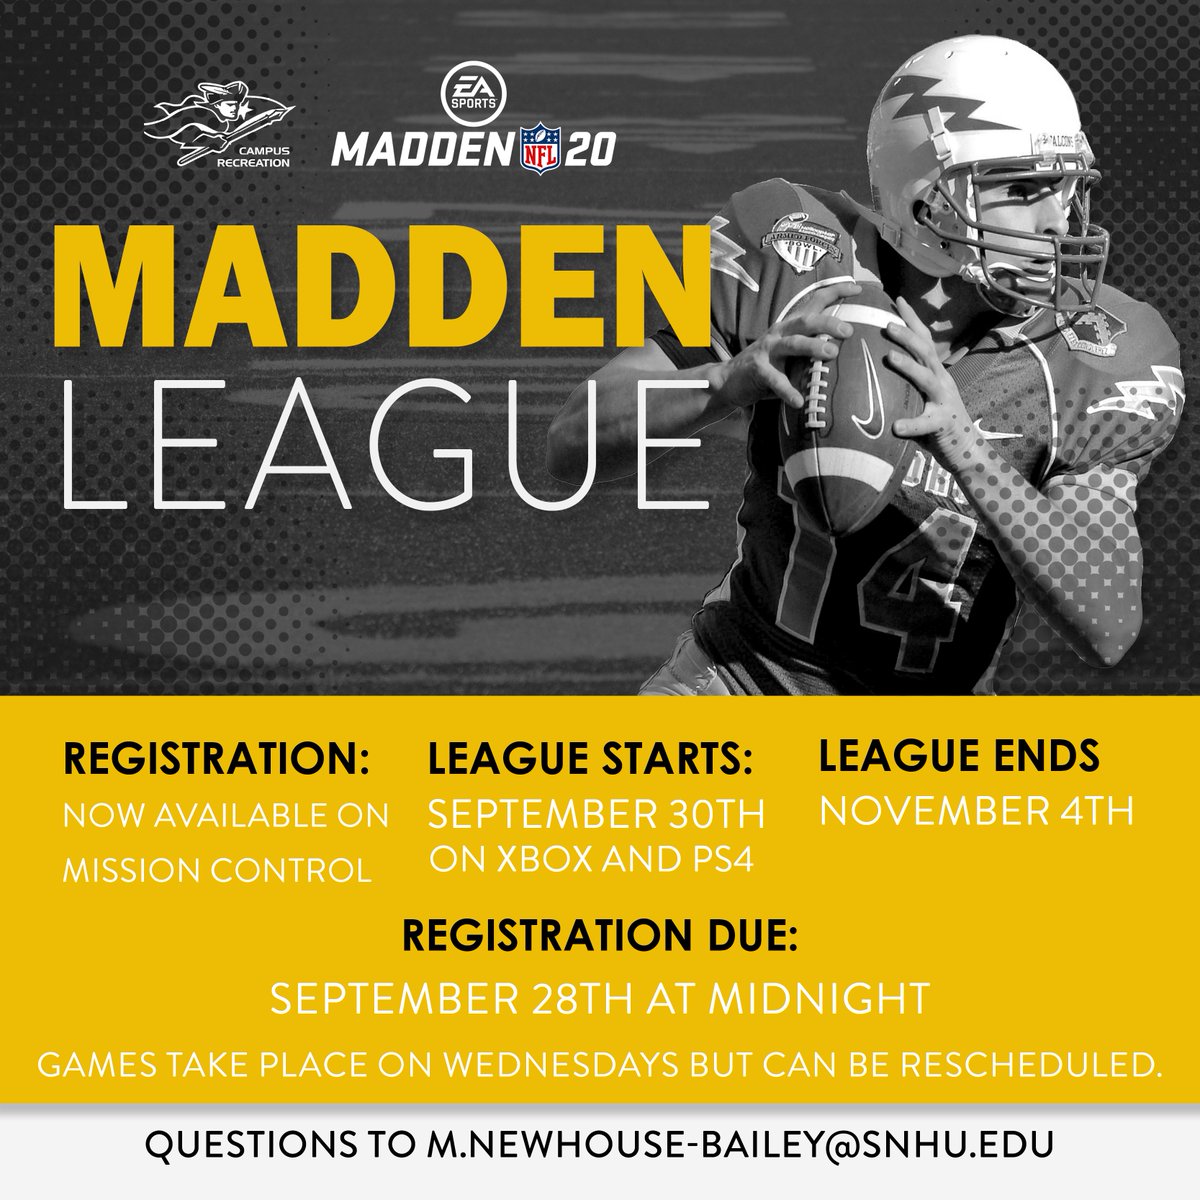 Sign-Ups End 09/28 at midnight! Come show off your skills with Campus Rec 🏈 #MaddenLeague #Madden20 @snhuclubsports @snhu @snhuinvolvement @snhupenmen @snhures Sign-Up at missioncontrol.gg/play or Email M.Newhouse-Bailey@snhu.edu for more info!